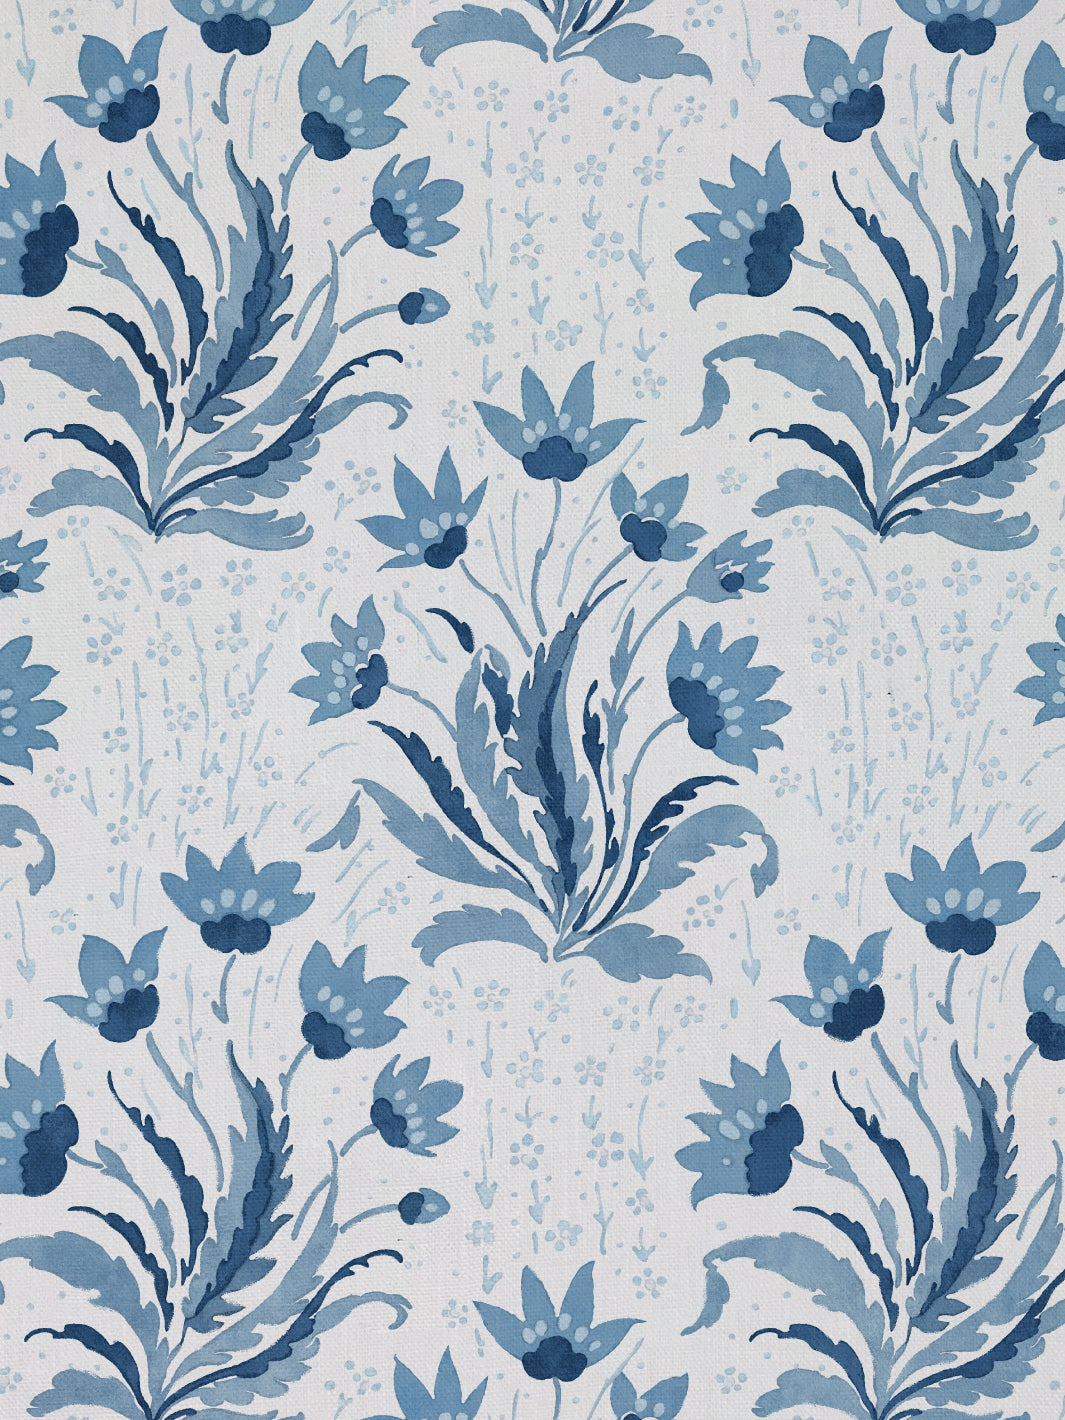 'Hillhouse Floral Tonal' Linen Fabric by Nathan Turner - Blue